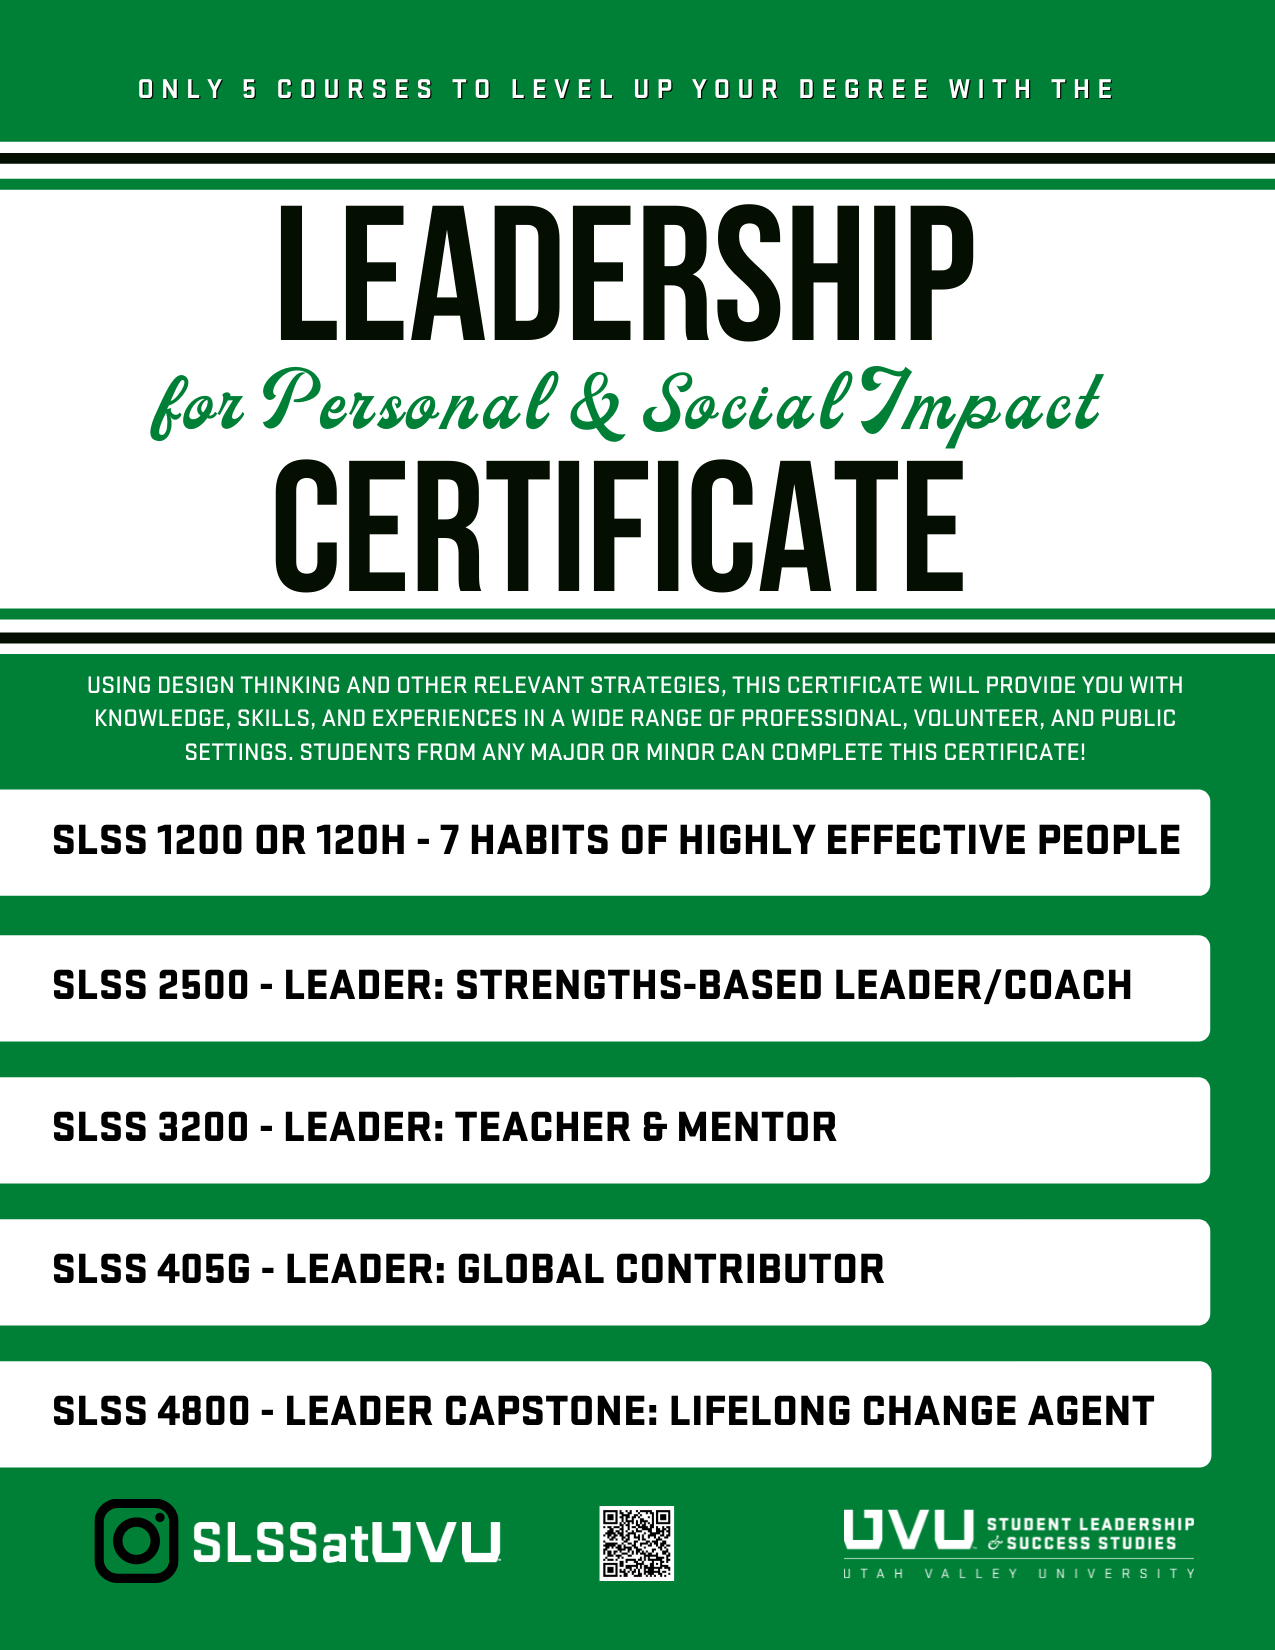 Leadership for Personal and Social Impact Certificate